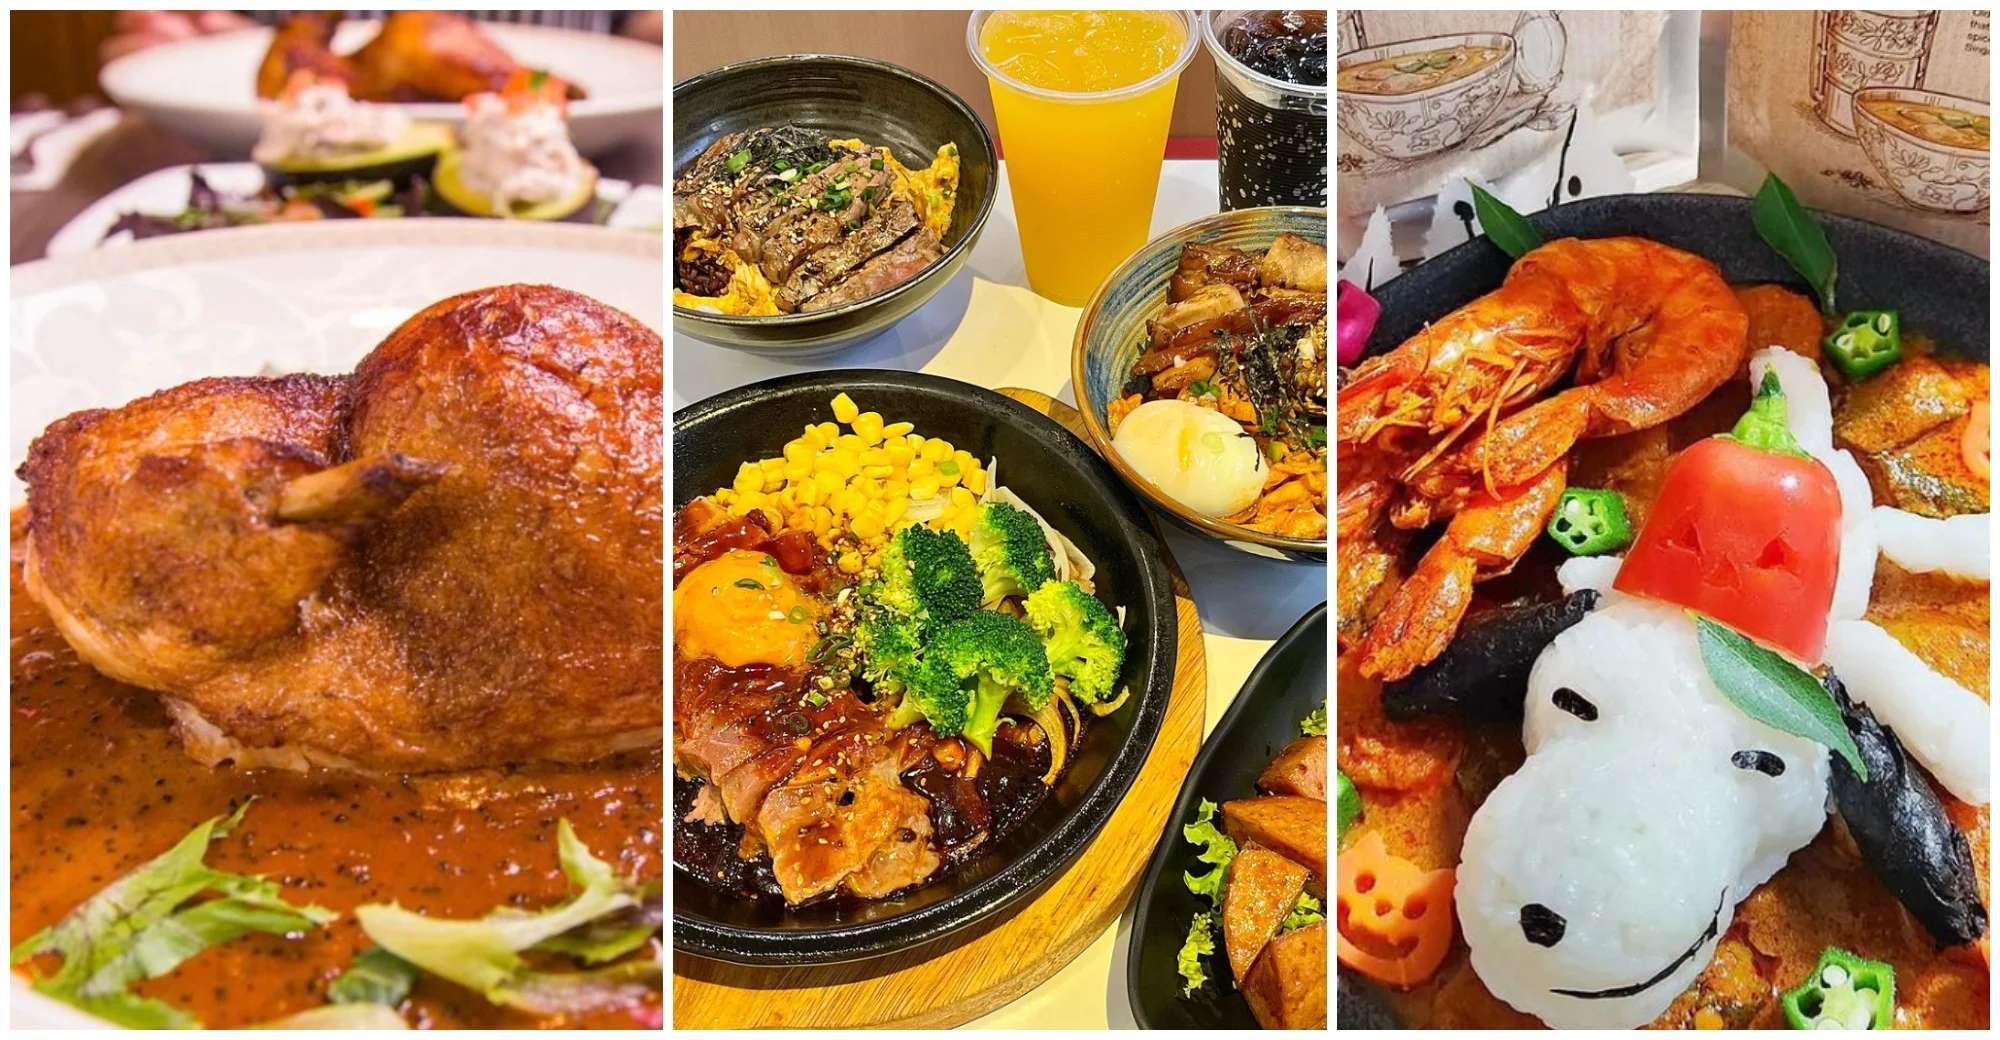 15 Halal Eateries Near The National Stadium To Fuel Up Before And After Your Concert In Singapore